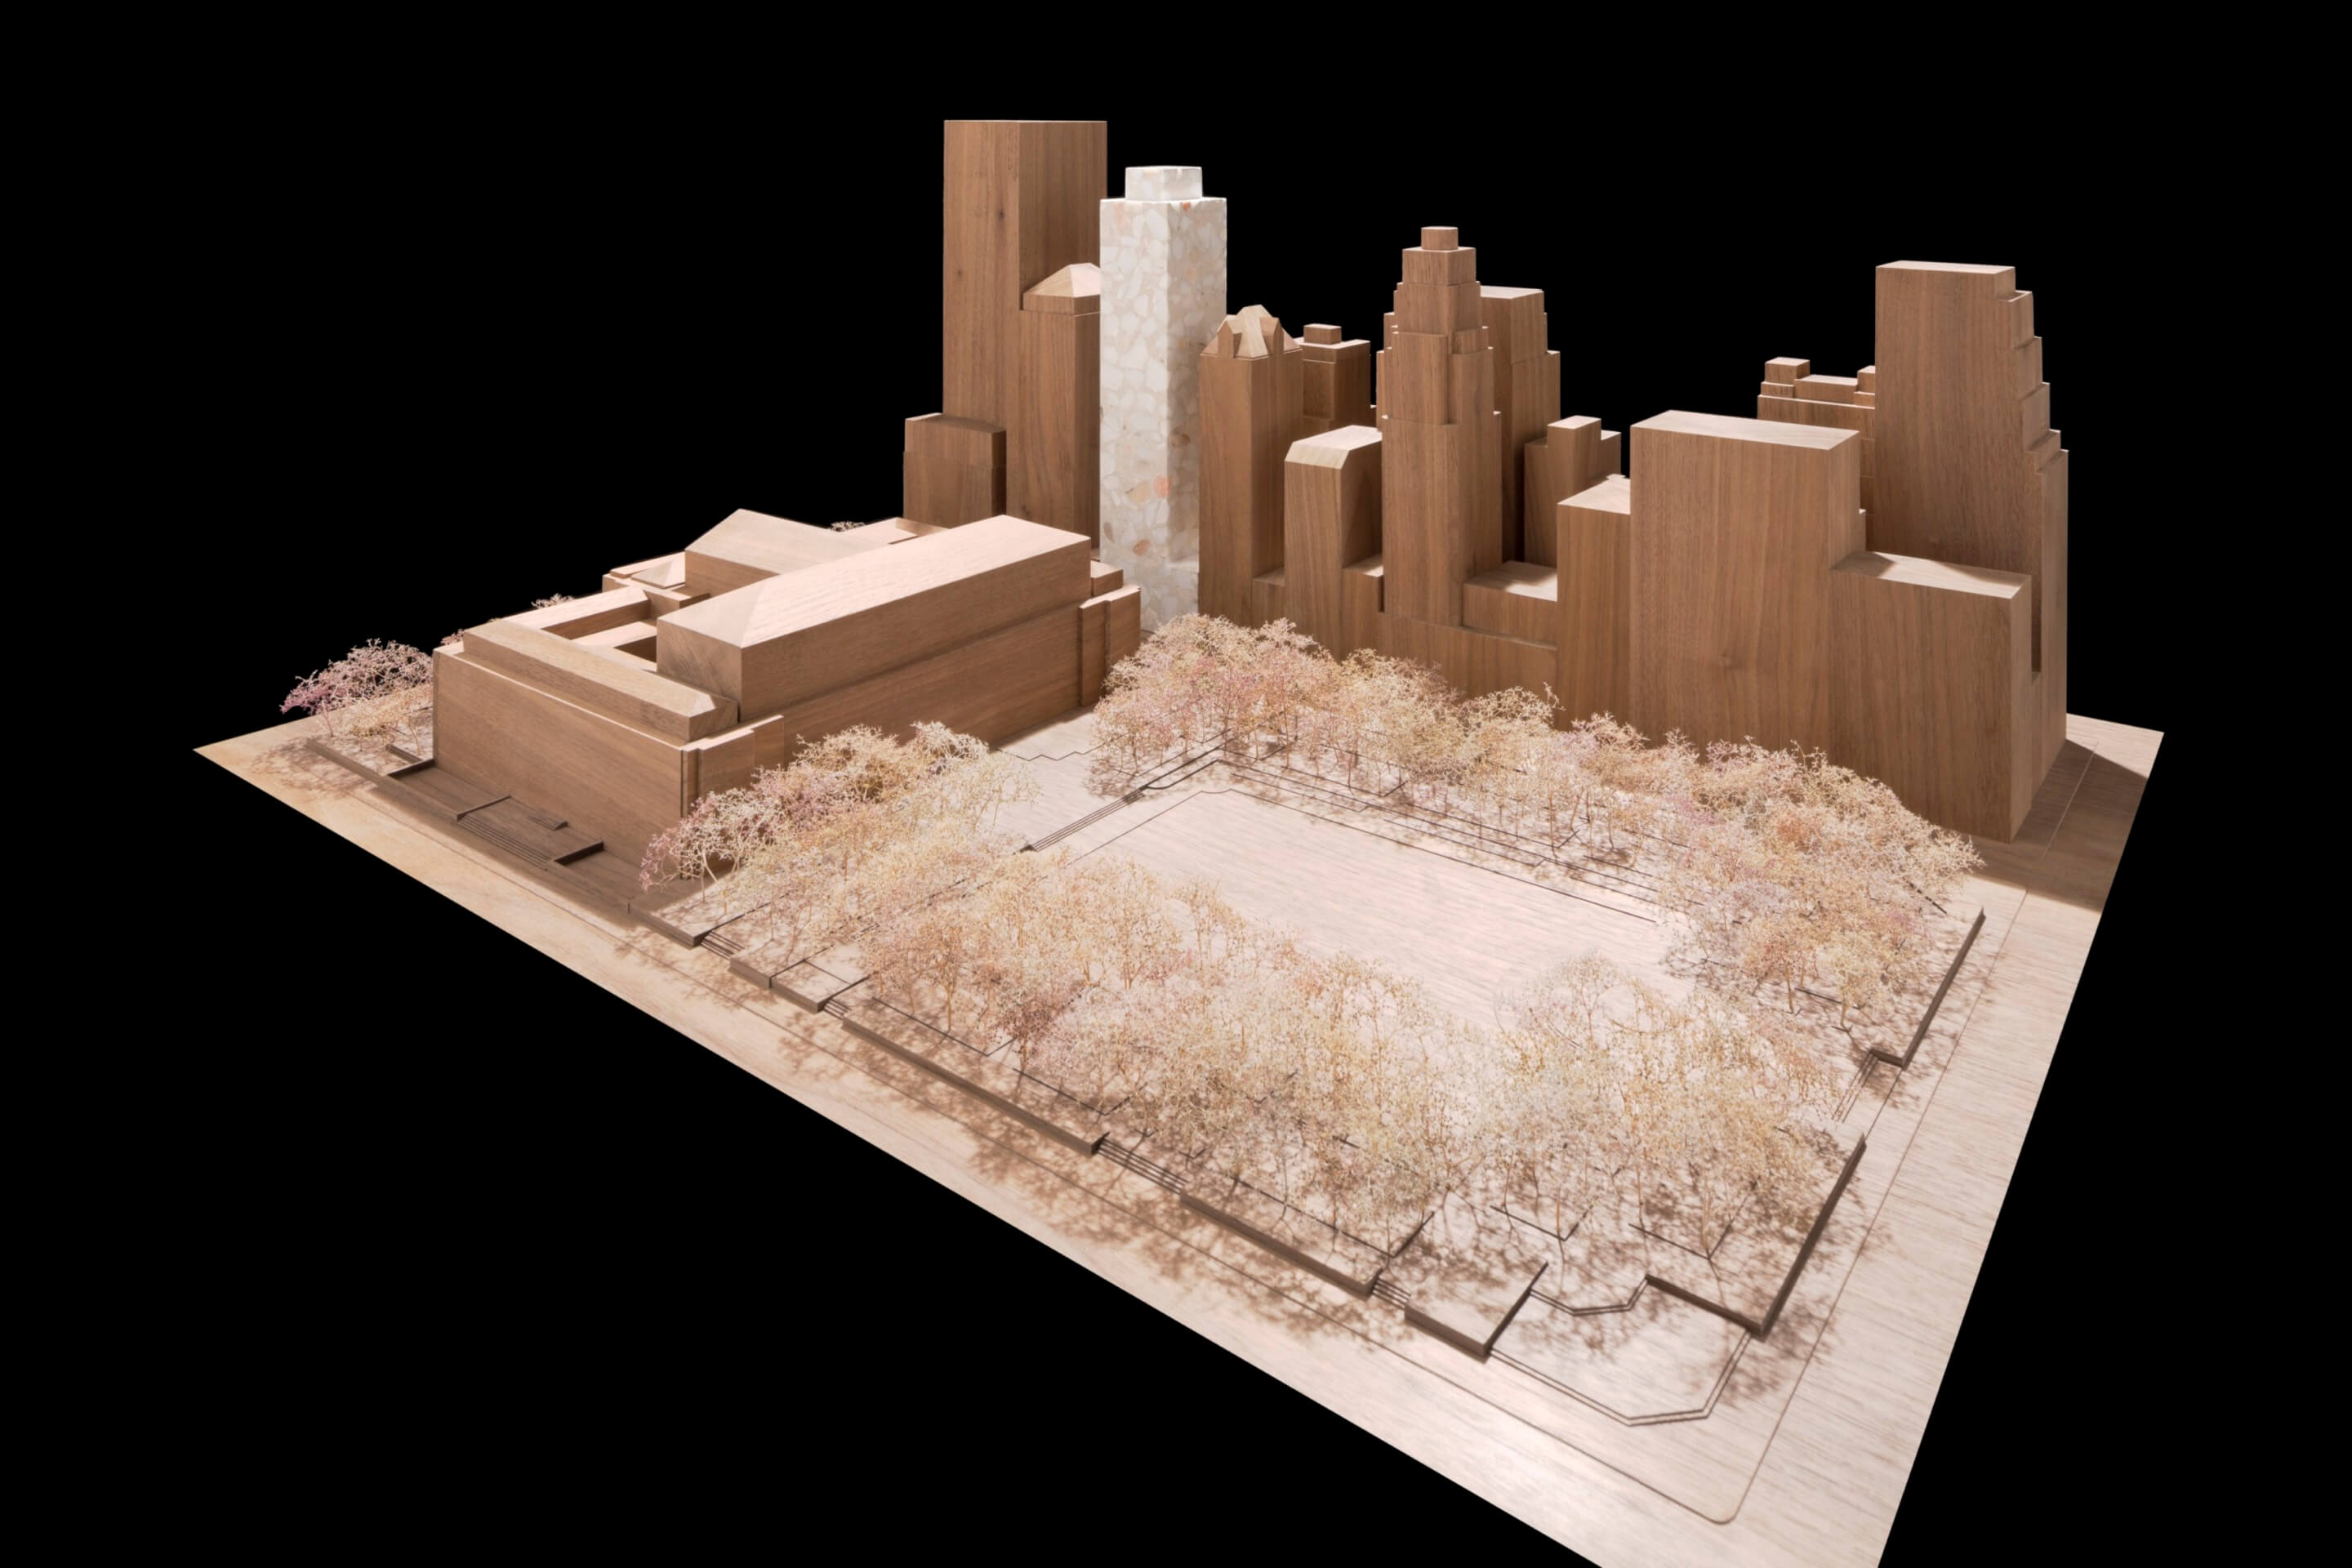 image of a render of the Bryan Park area where the tower is located